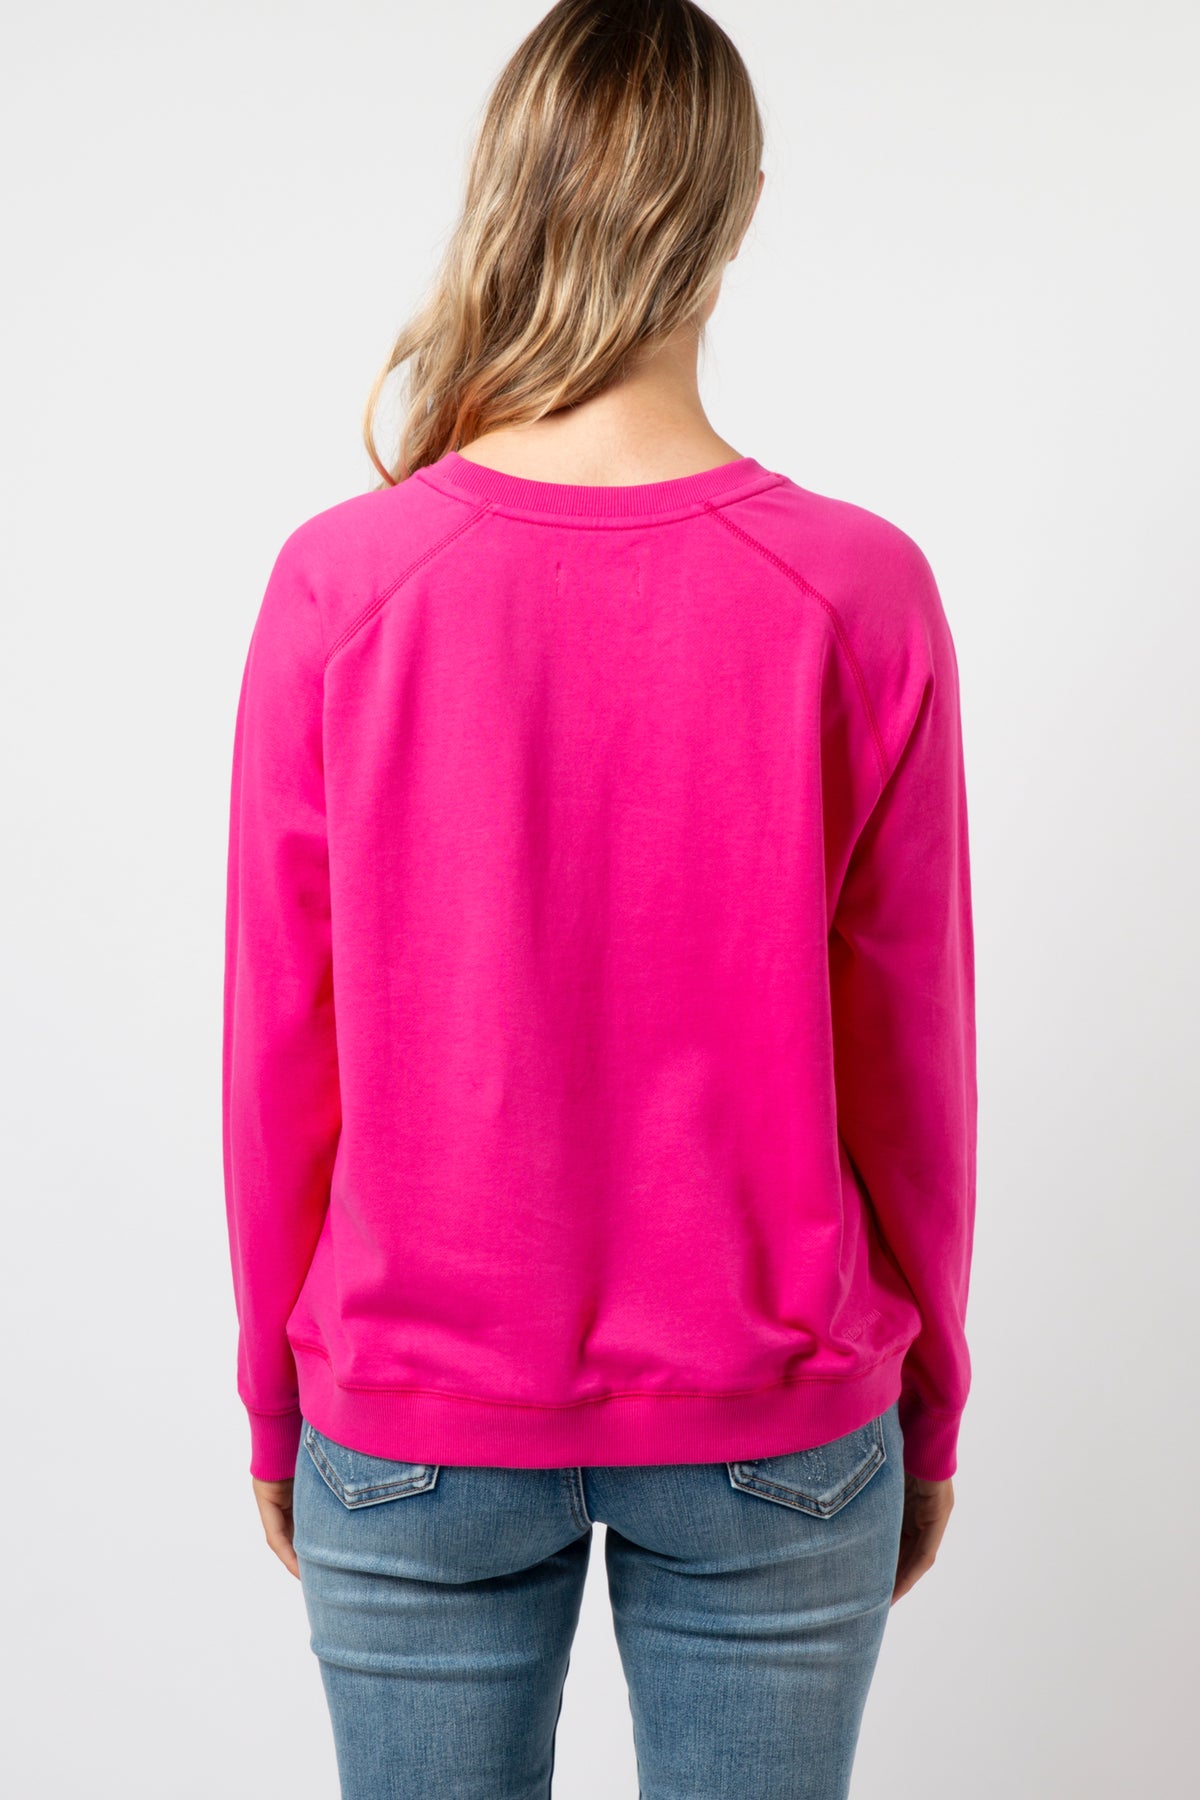 Classic Sweater Neon Pink With Bow